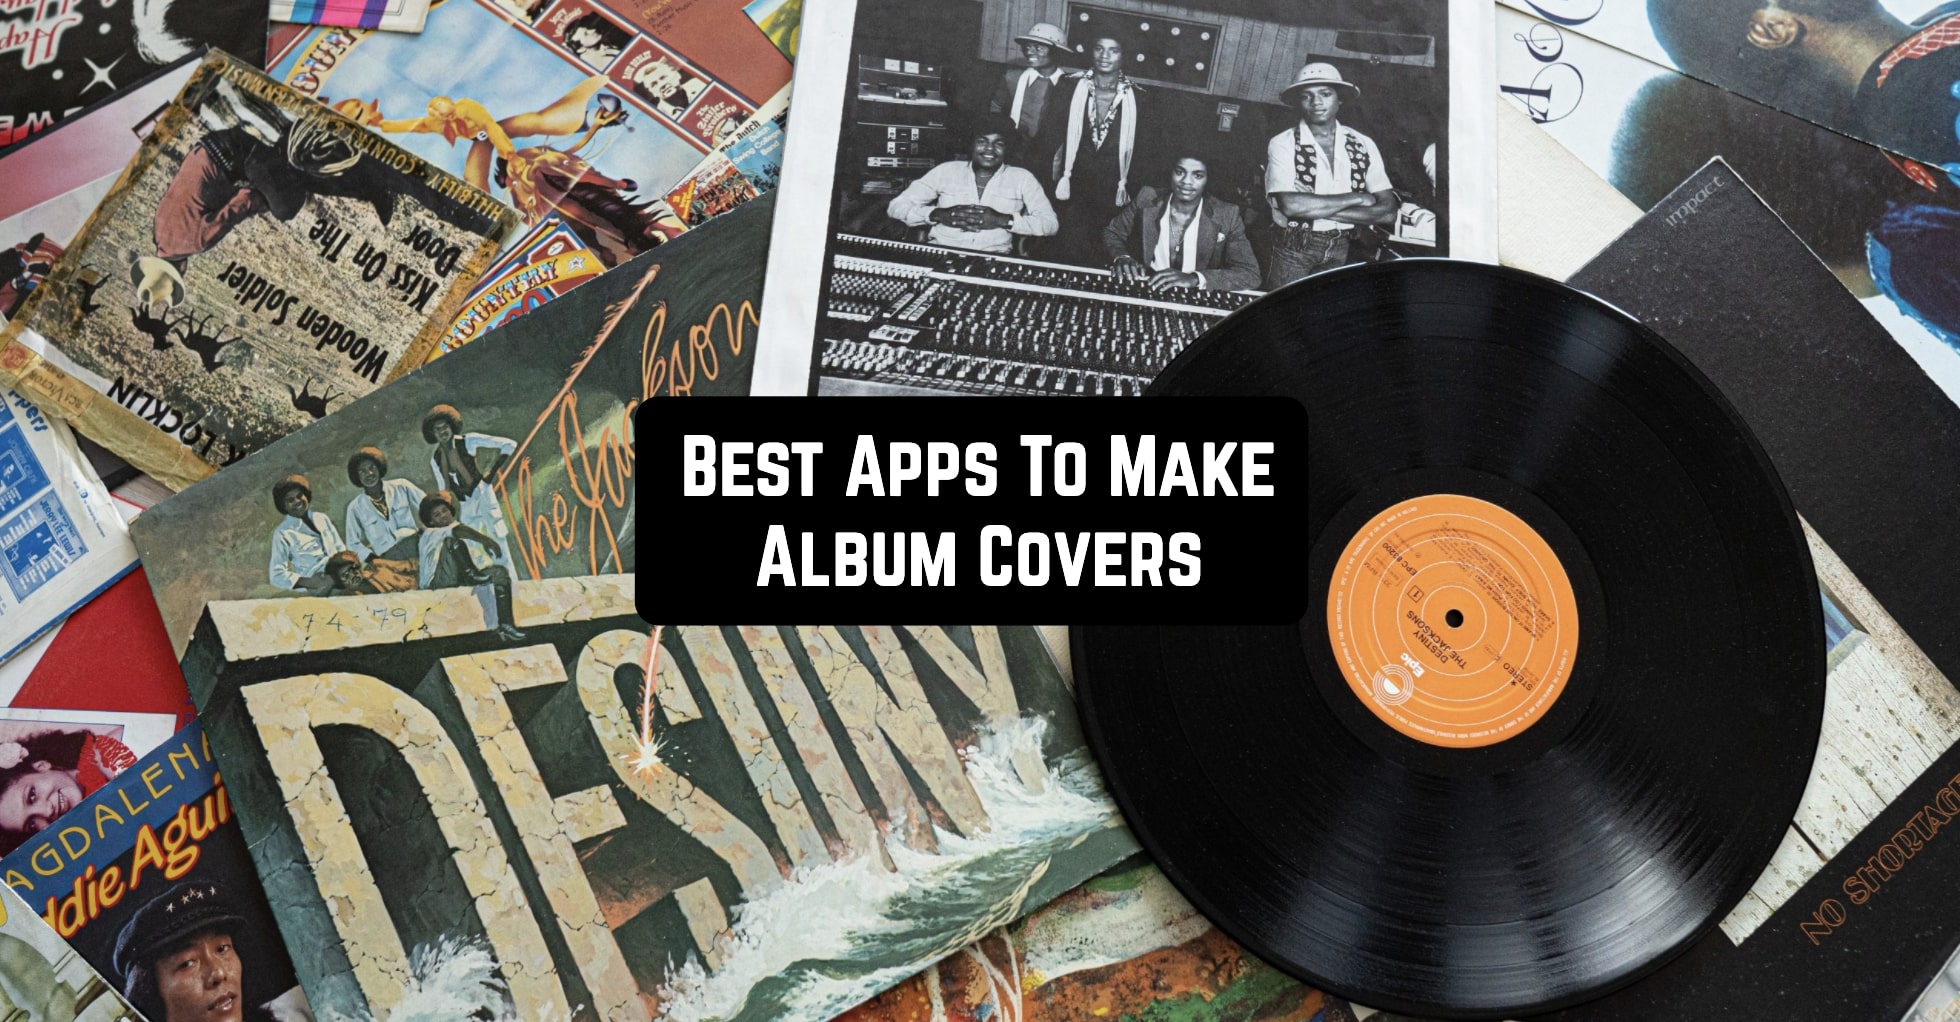 Best Apps To Make Album Covers